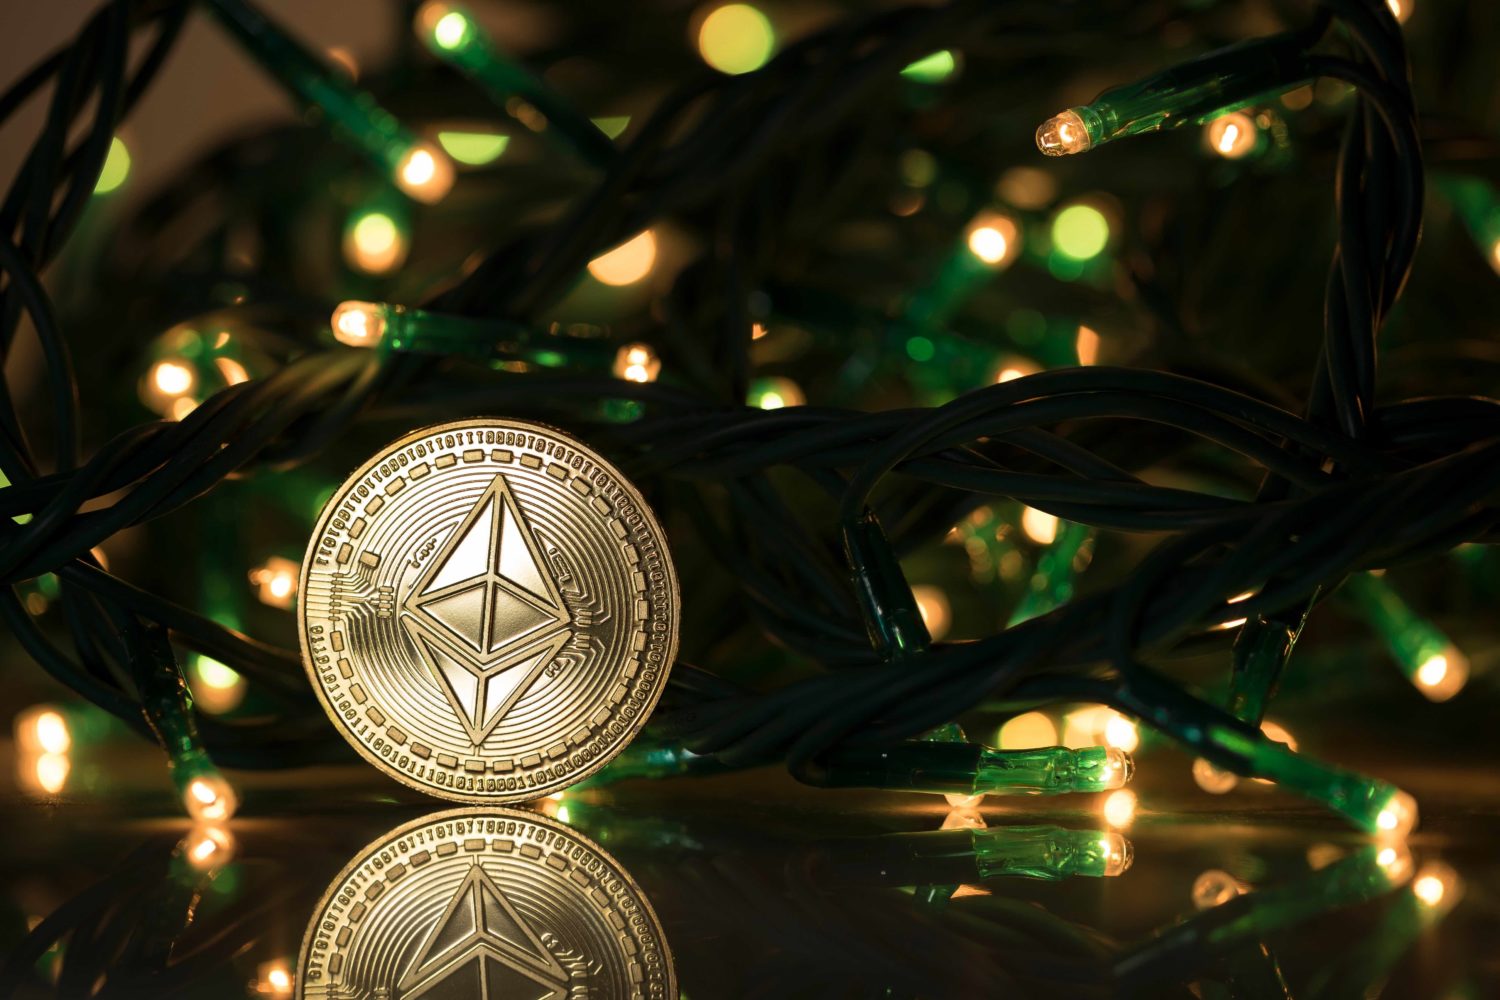 Fee Spike On Ethereum Classic Raises Fears Of More Exchange Attacks